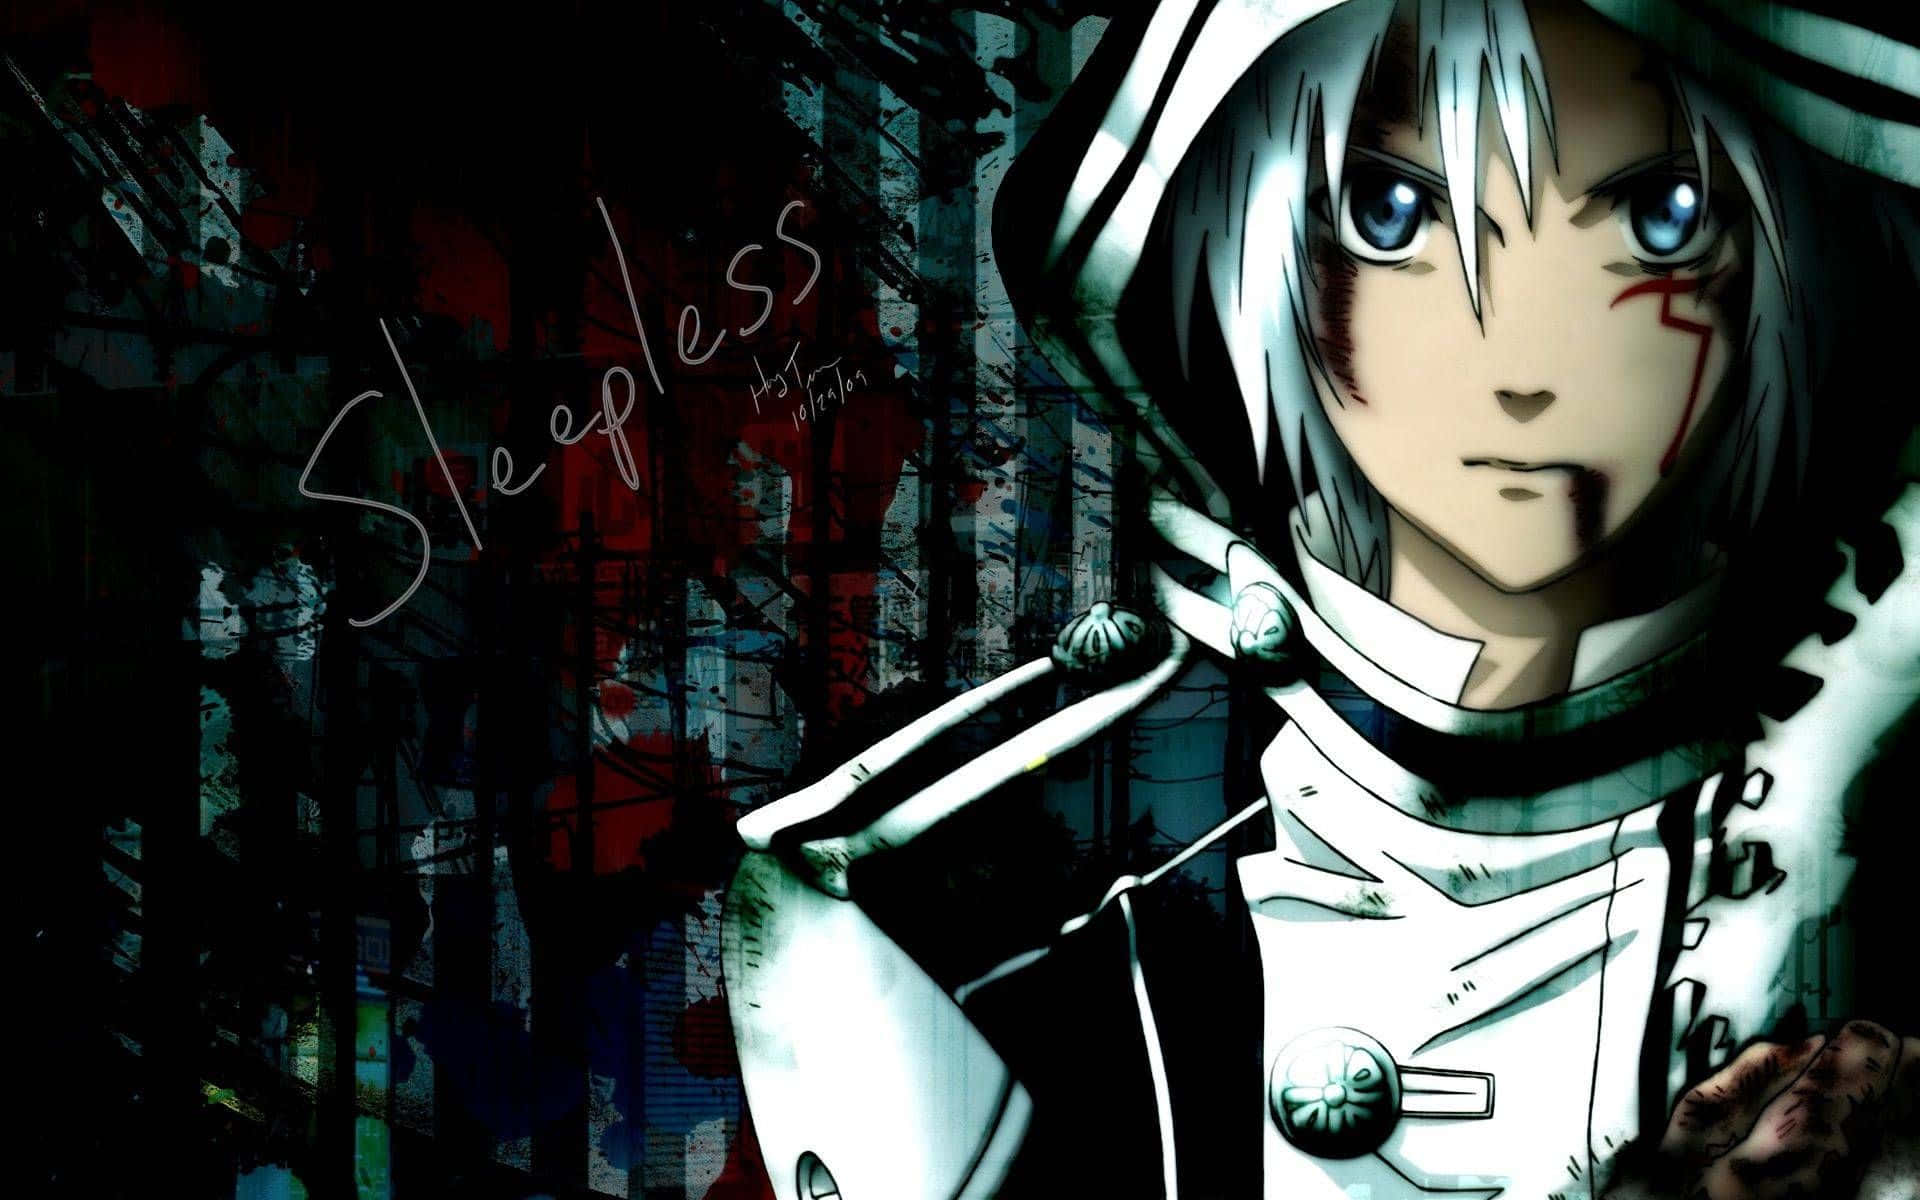 Anime Characters Male Wallpapers - Wallpaper Cave